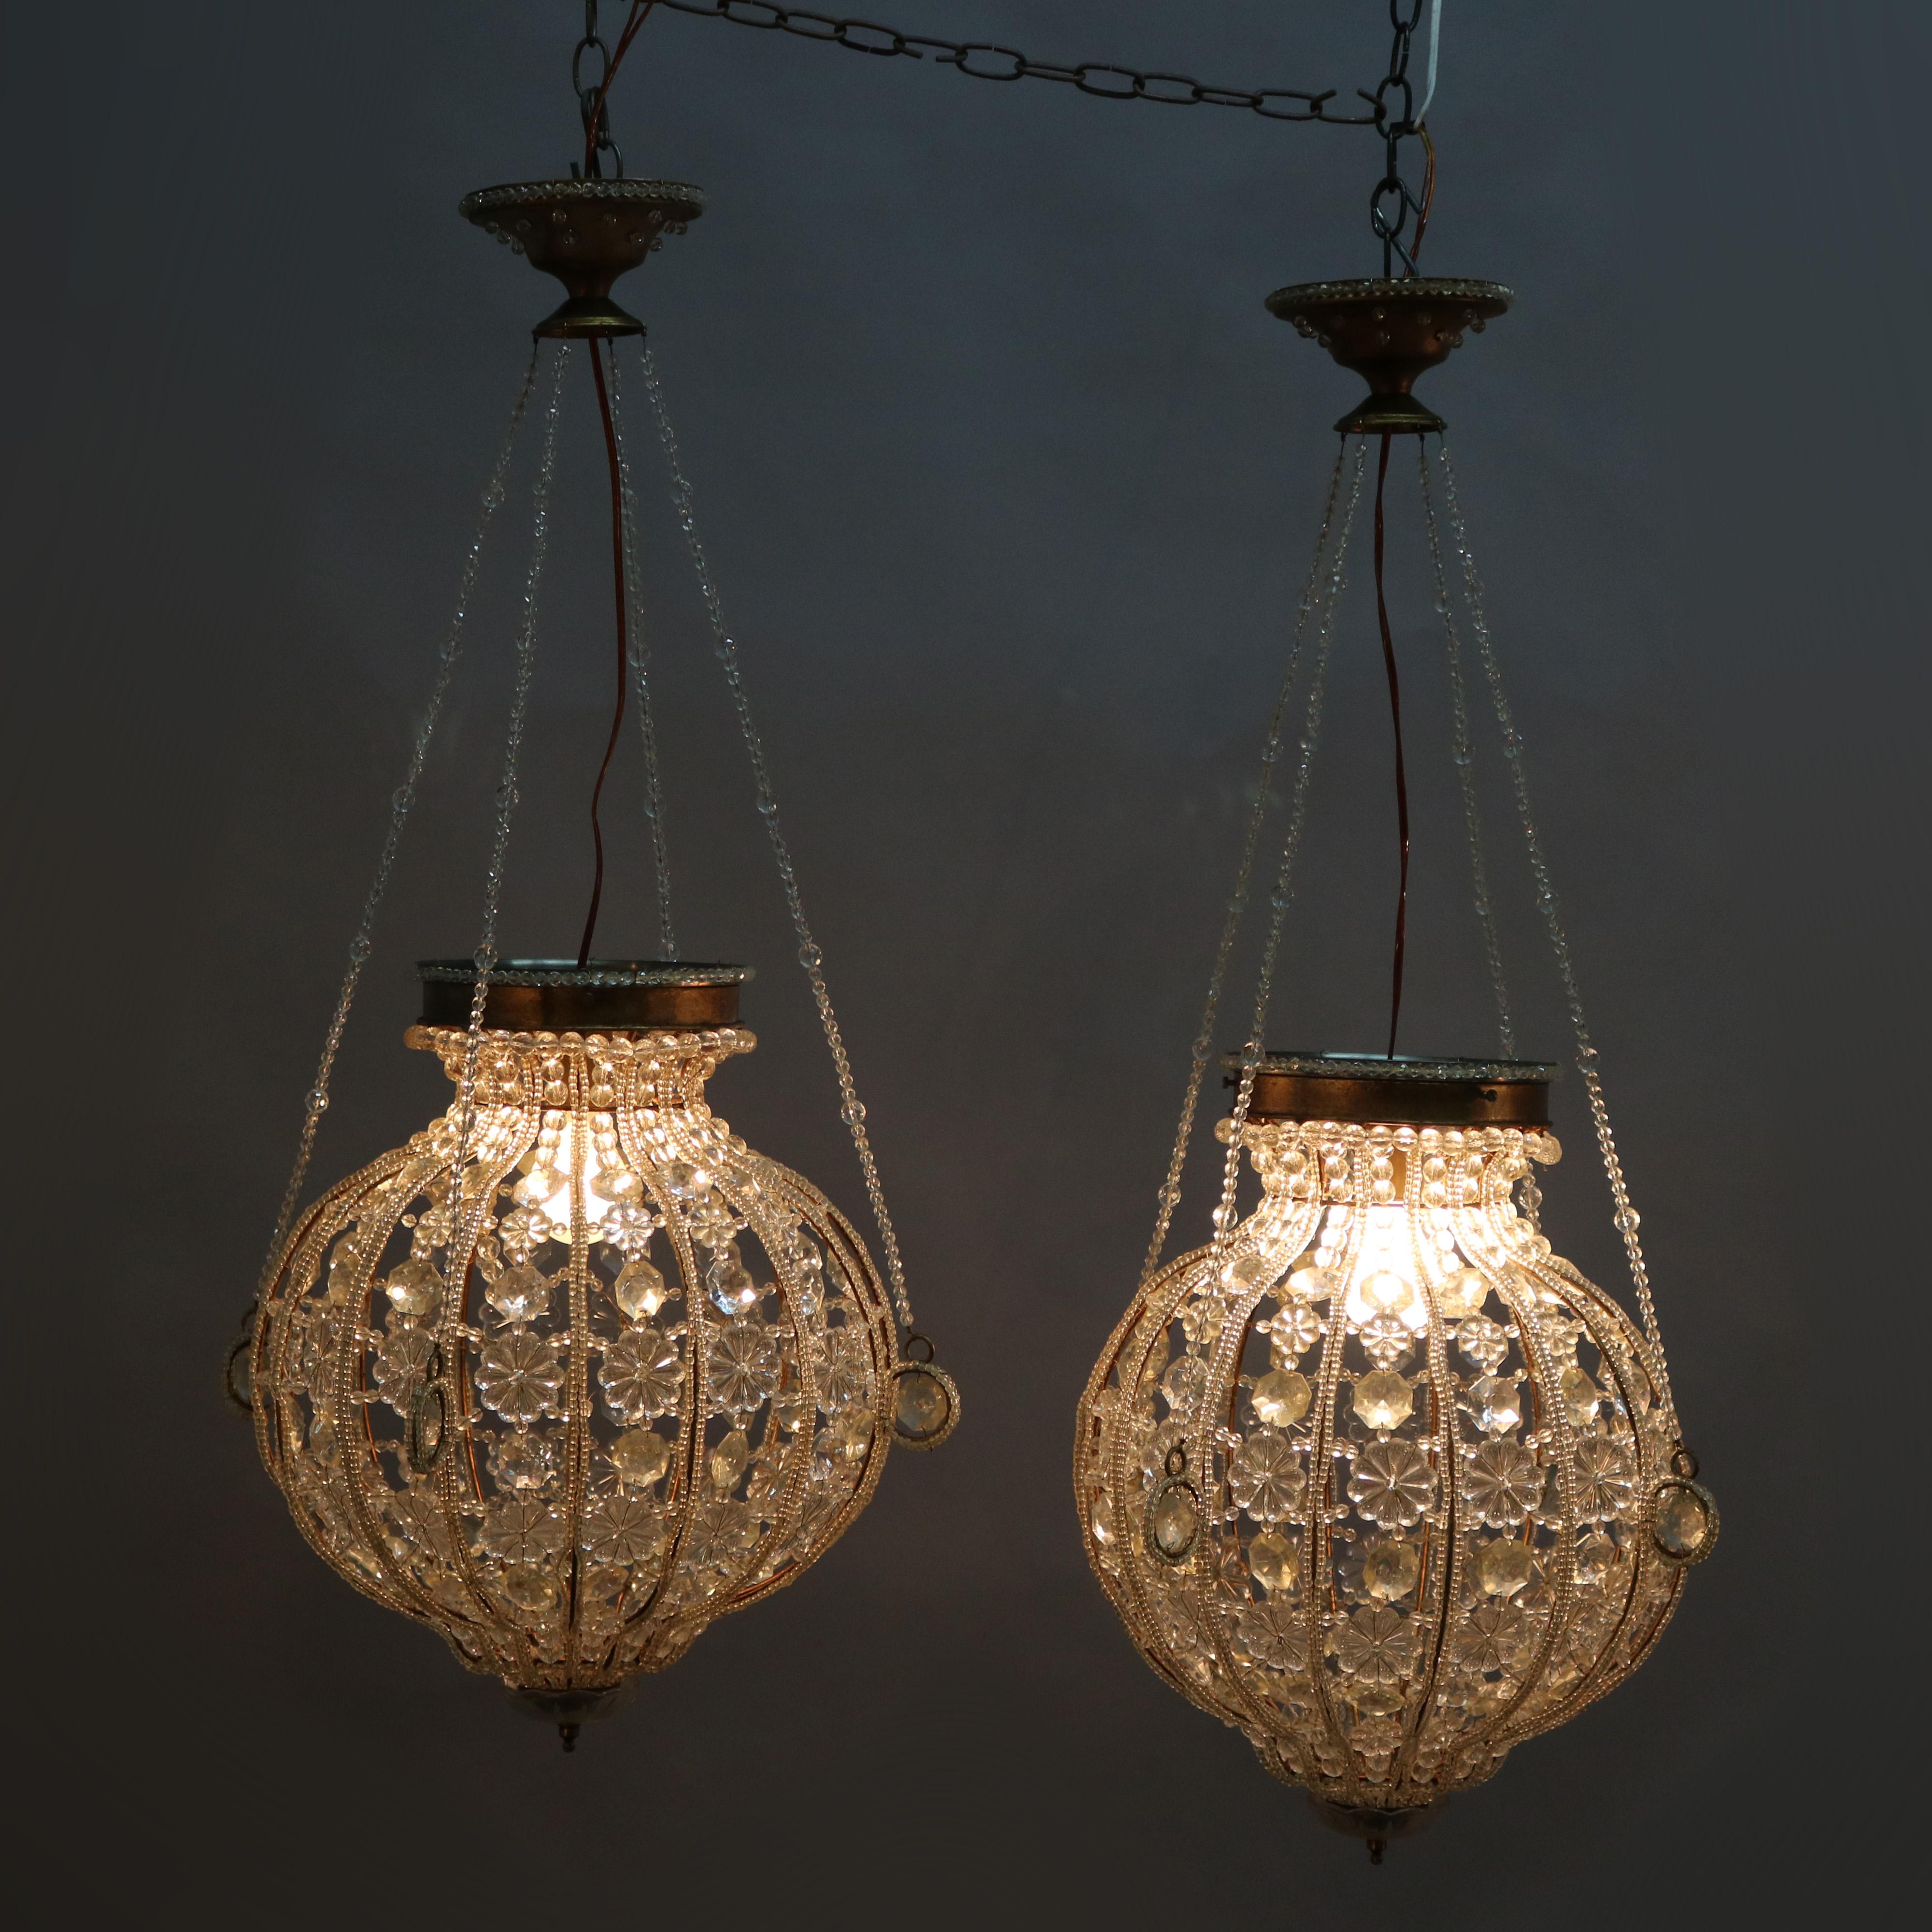 Cast Vintage Pair of Spherical Brass and Cut Crystal Chandeliers, 20th Century